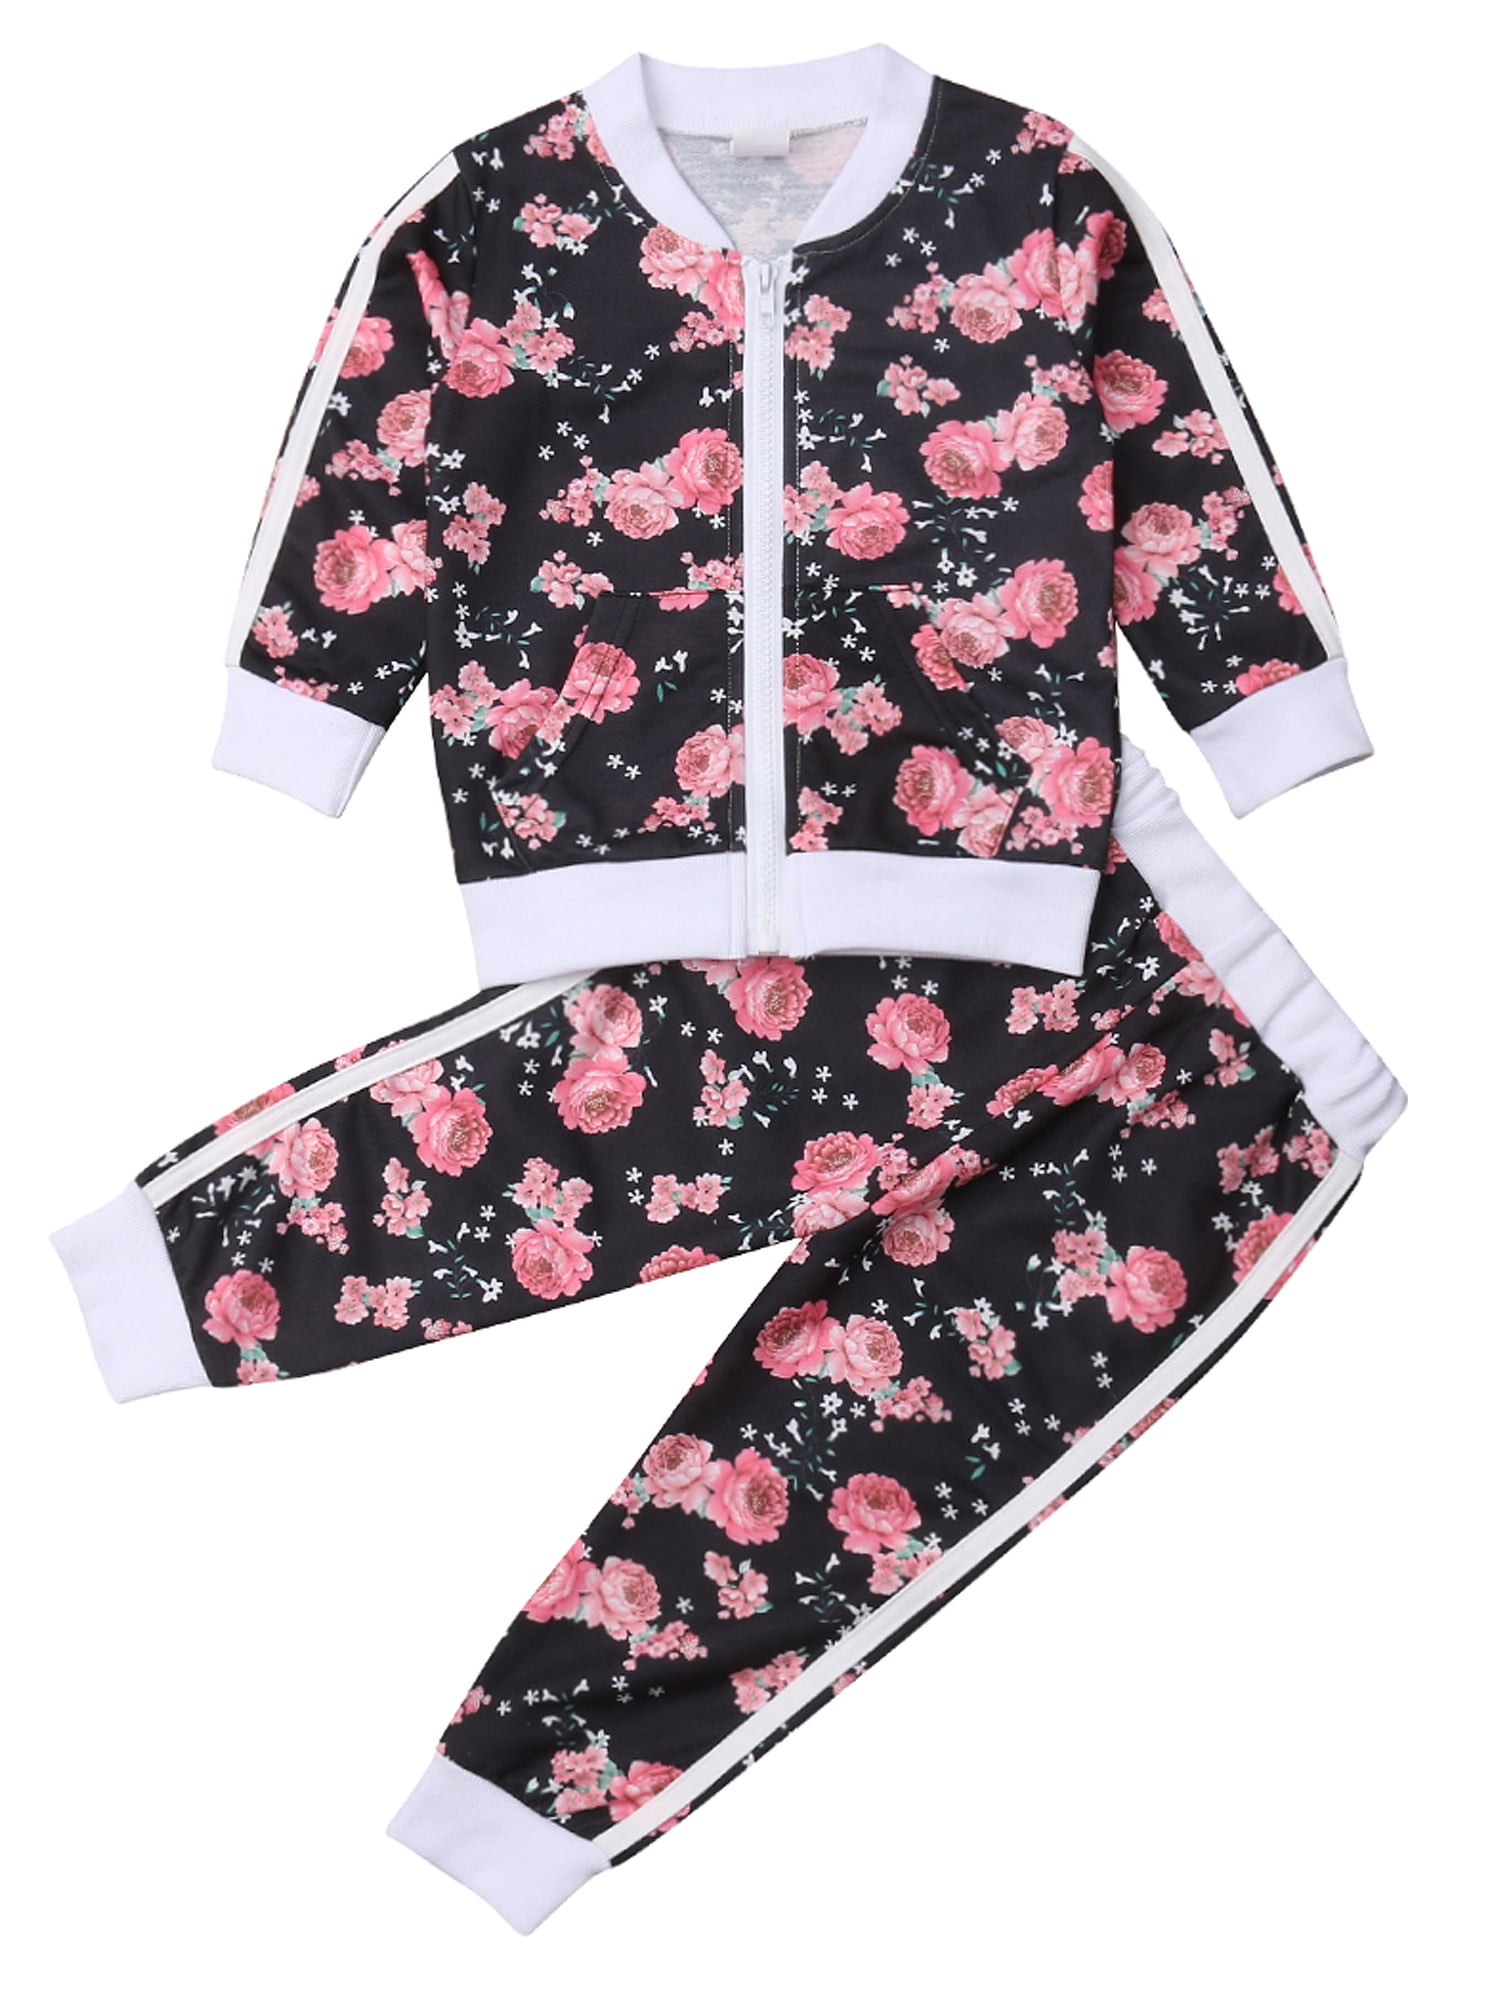 Toddler Kids Baby Girls Floral Tracksuit T Shirt Tops Pants Outfits Clothes Set